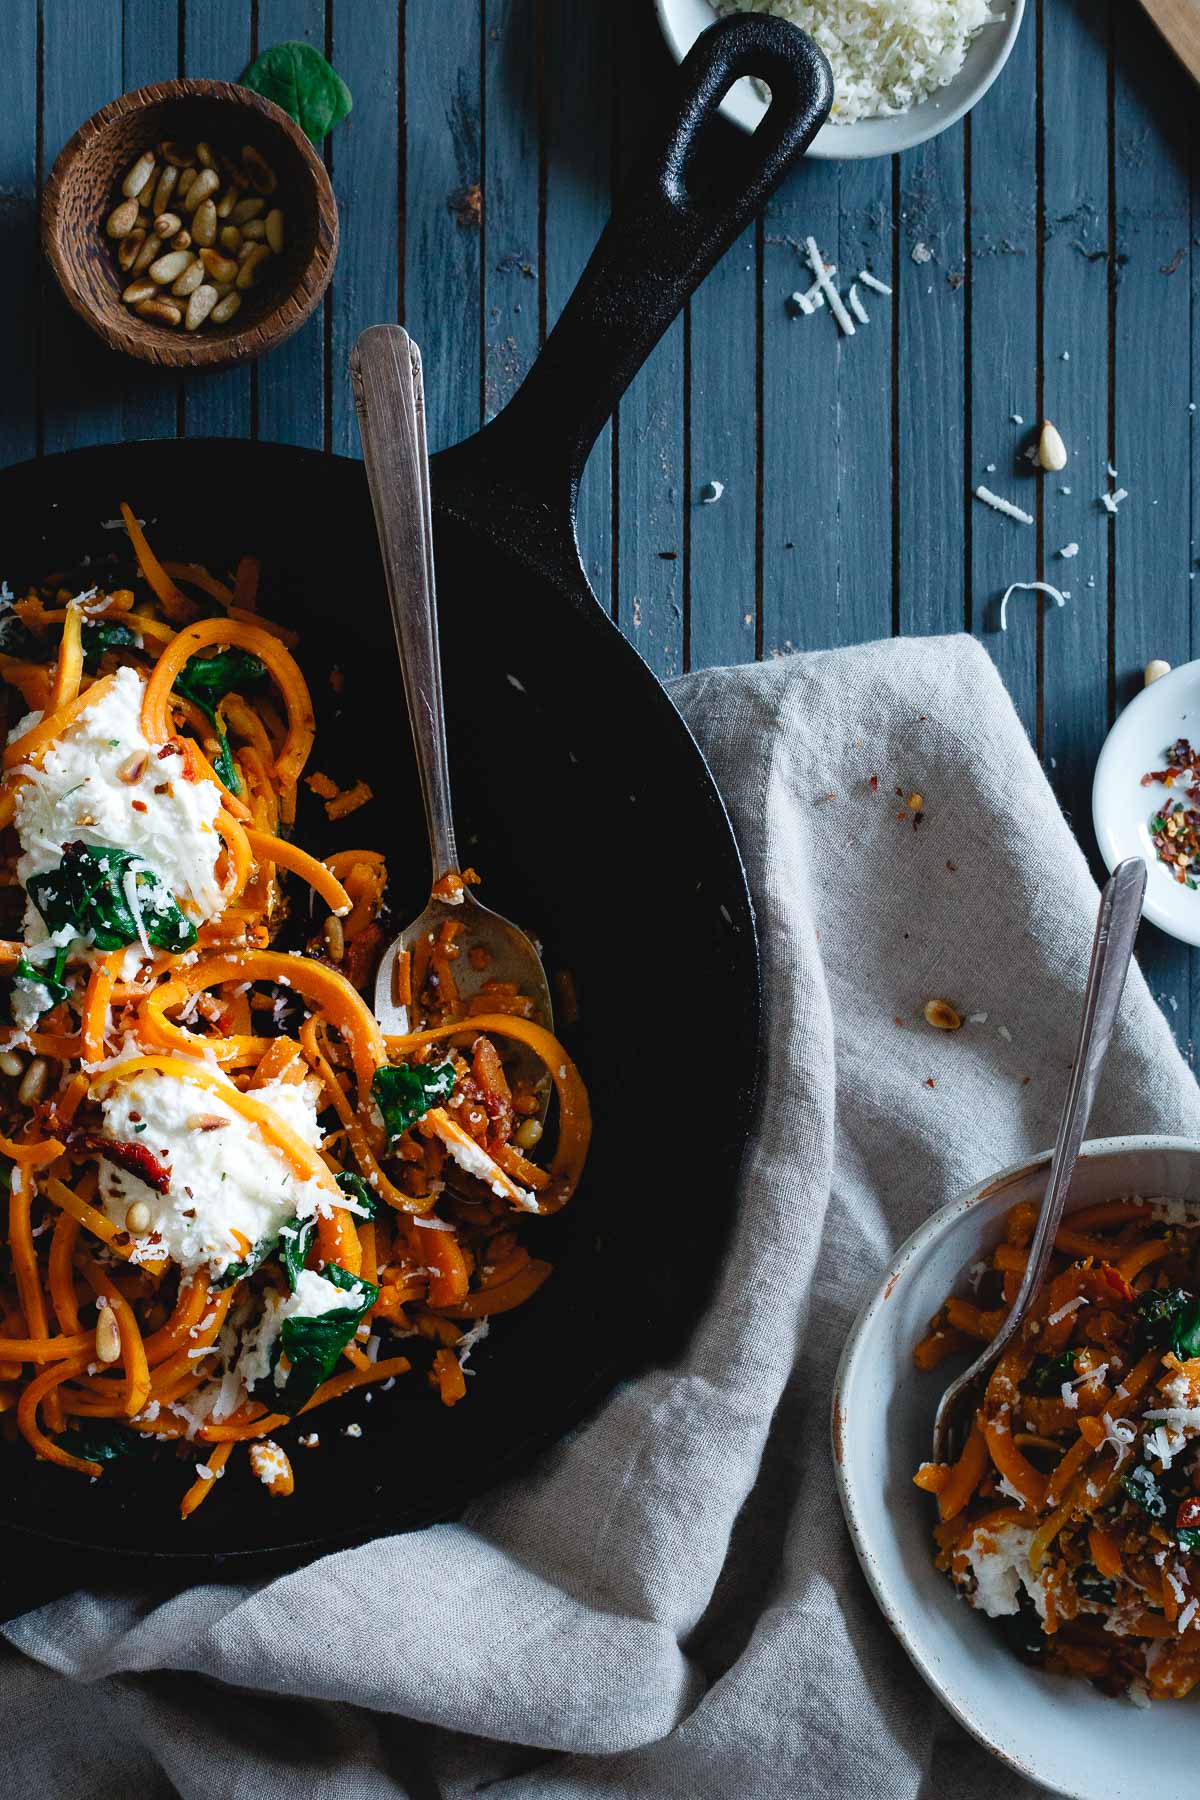 Garlicky butternut squash noodles with spinach, ricotta and pine nuts prove that vegetarian food can definitely be comforting too!